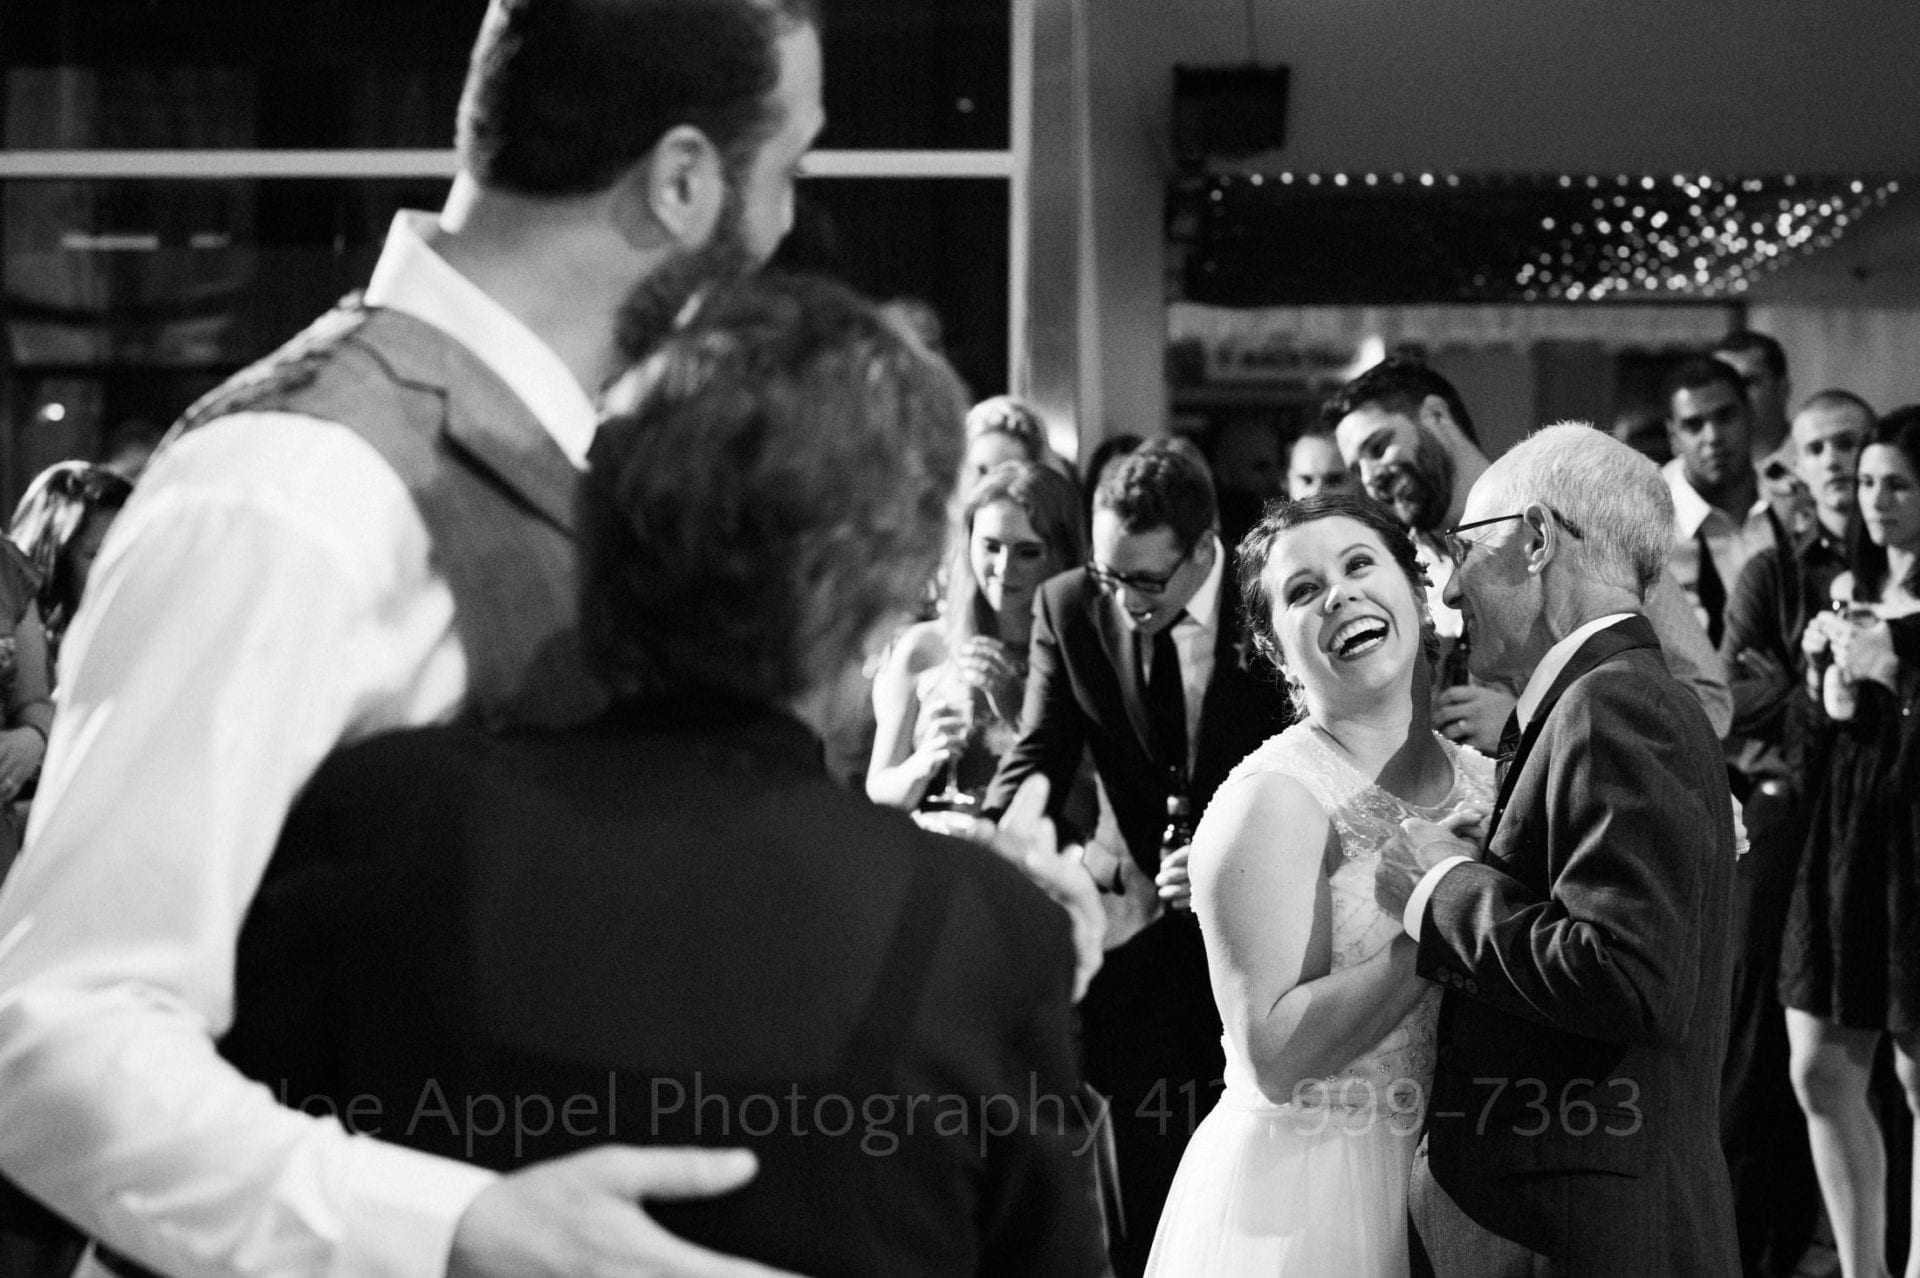 A bride dancing with her father looks over at her groom who is dancing with his mother and smiles.